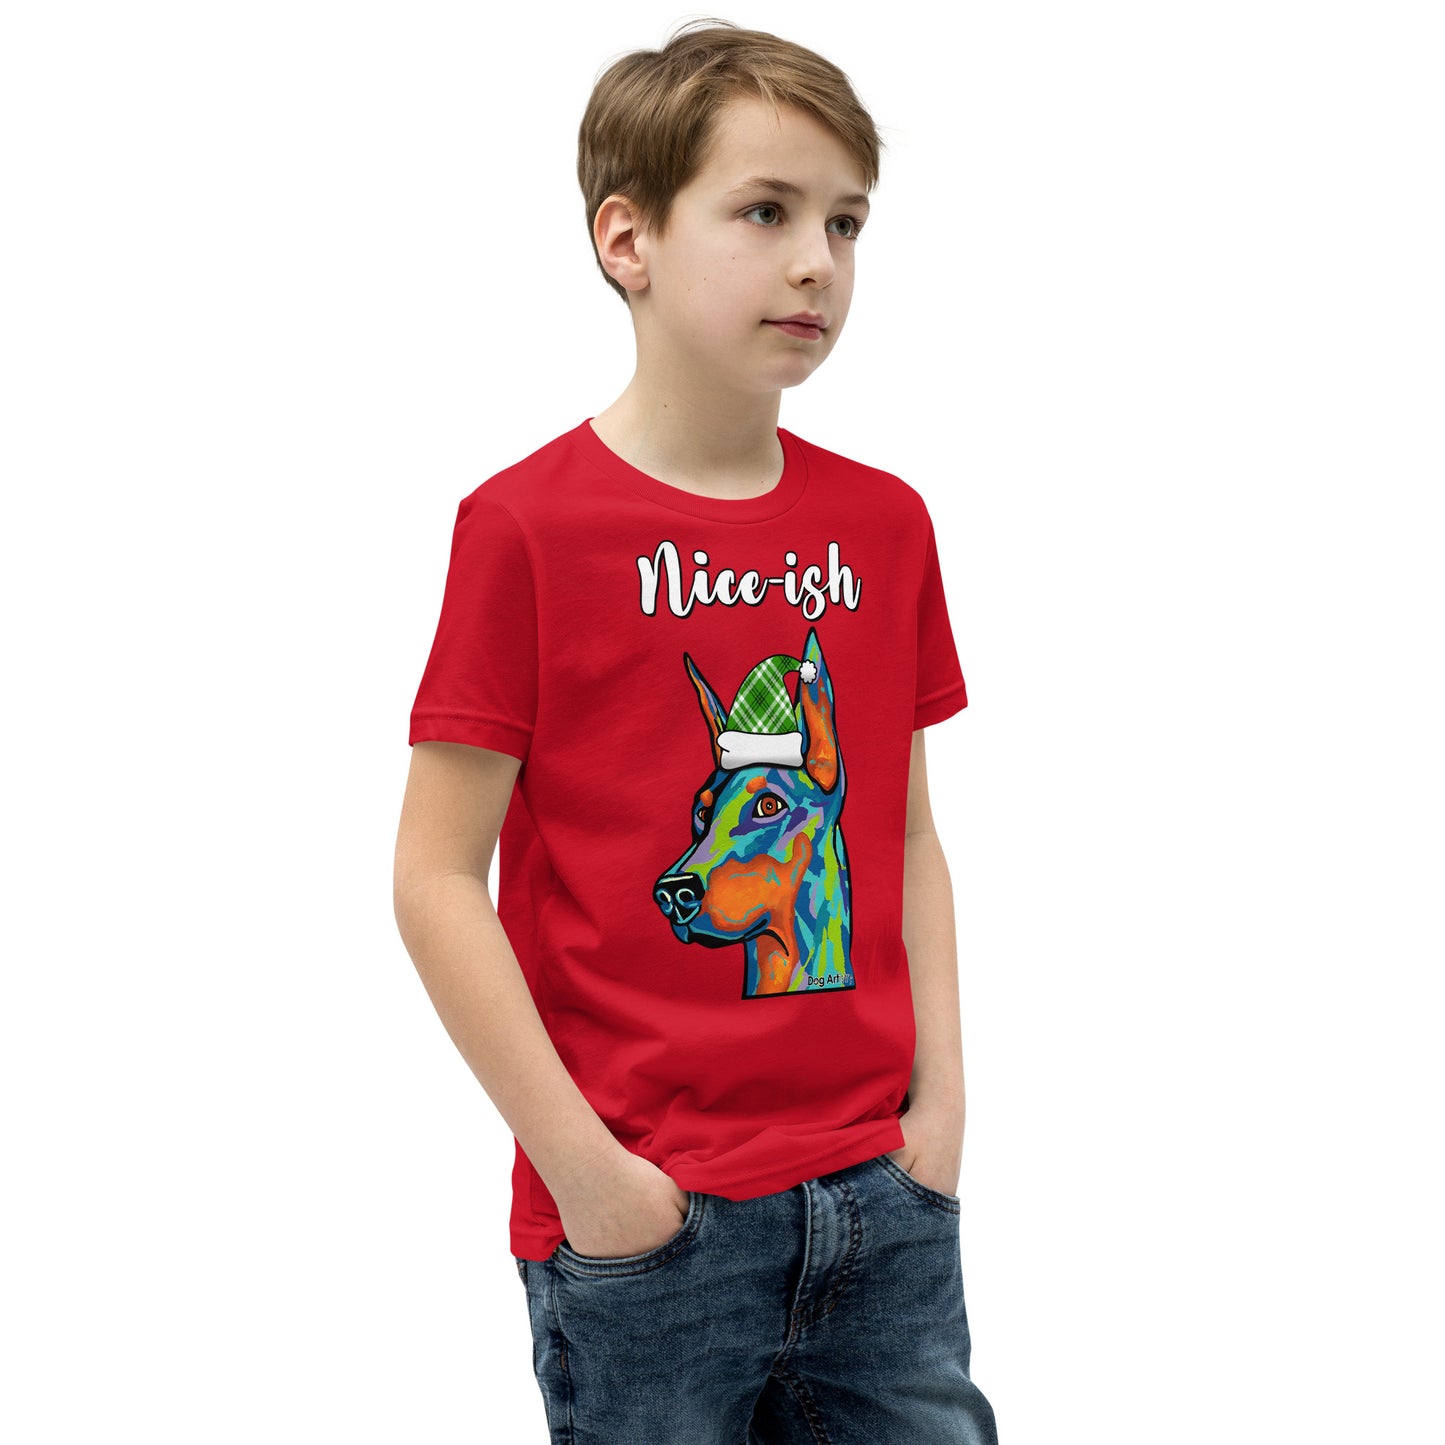 Nice-Ish Doberman Pinscher Holiday youth t-shirt red by Dog Artistry.